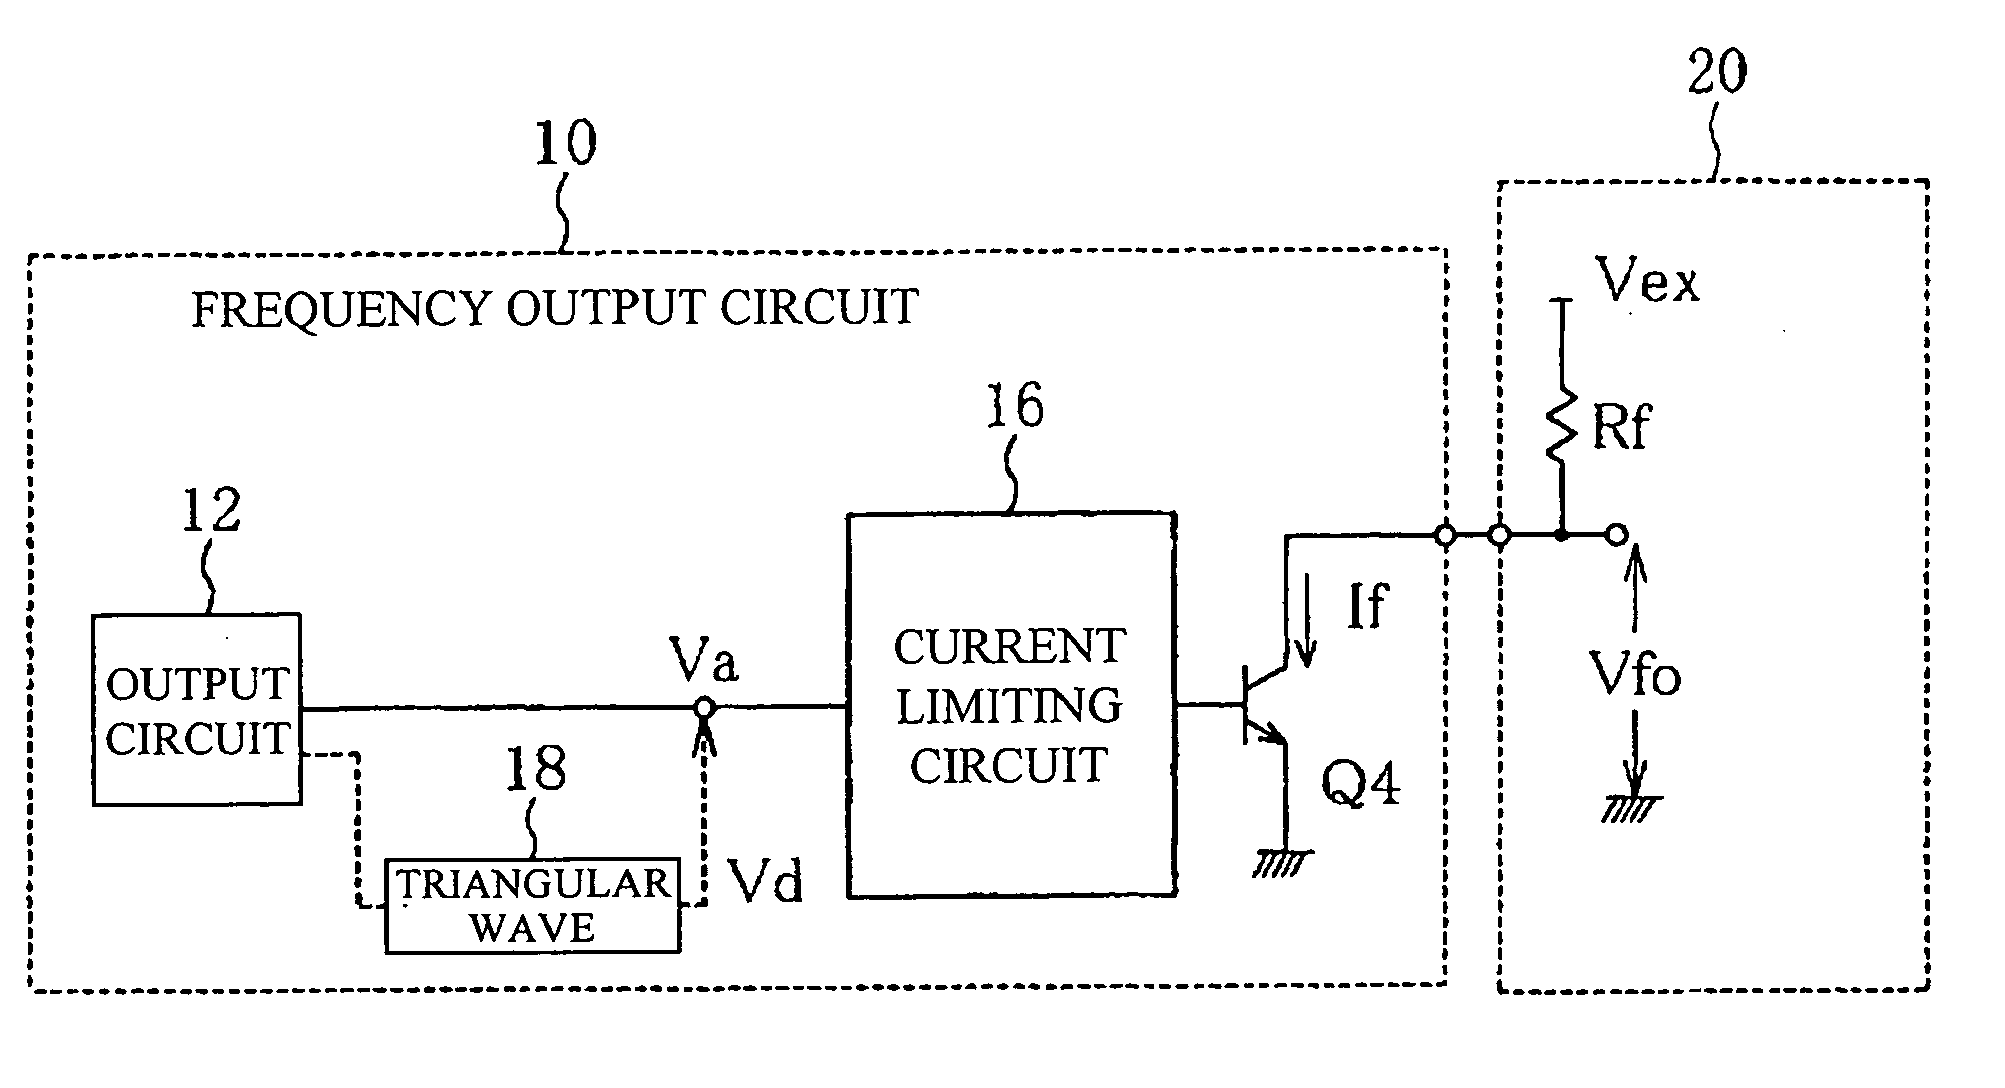 Frequency output circuit